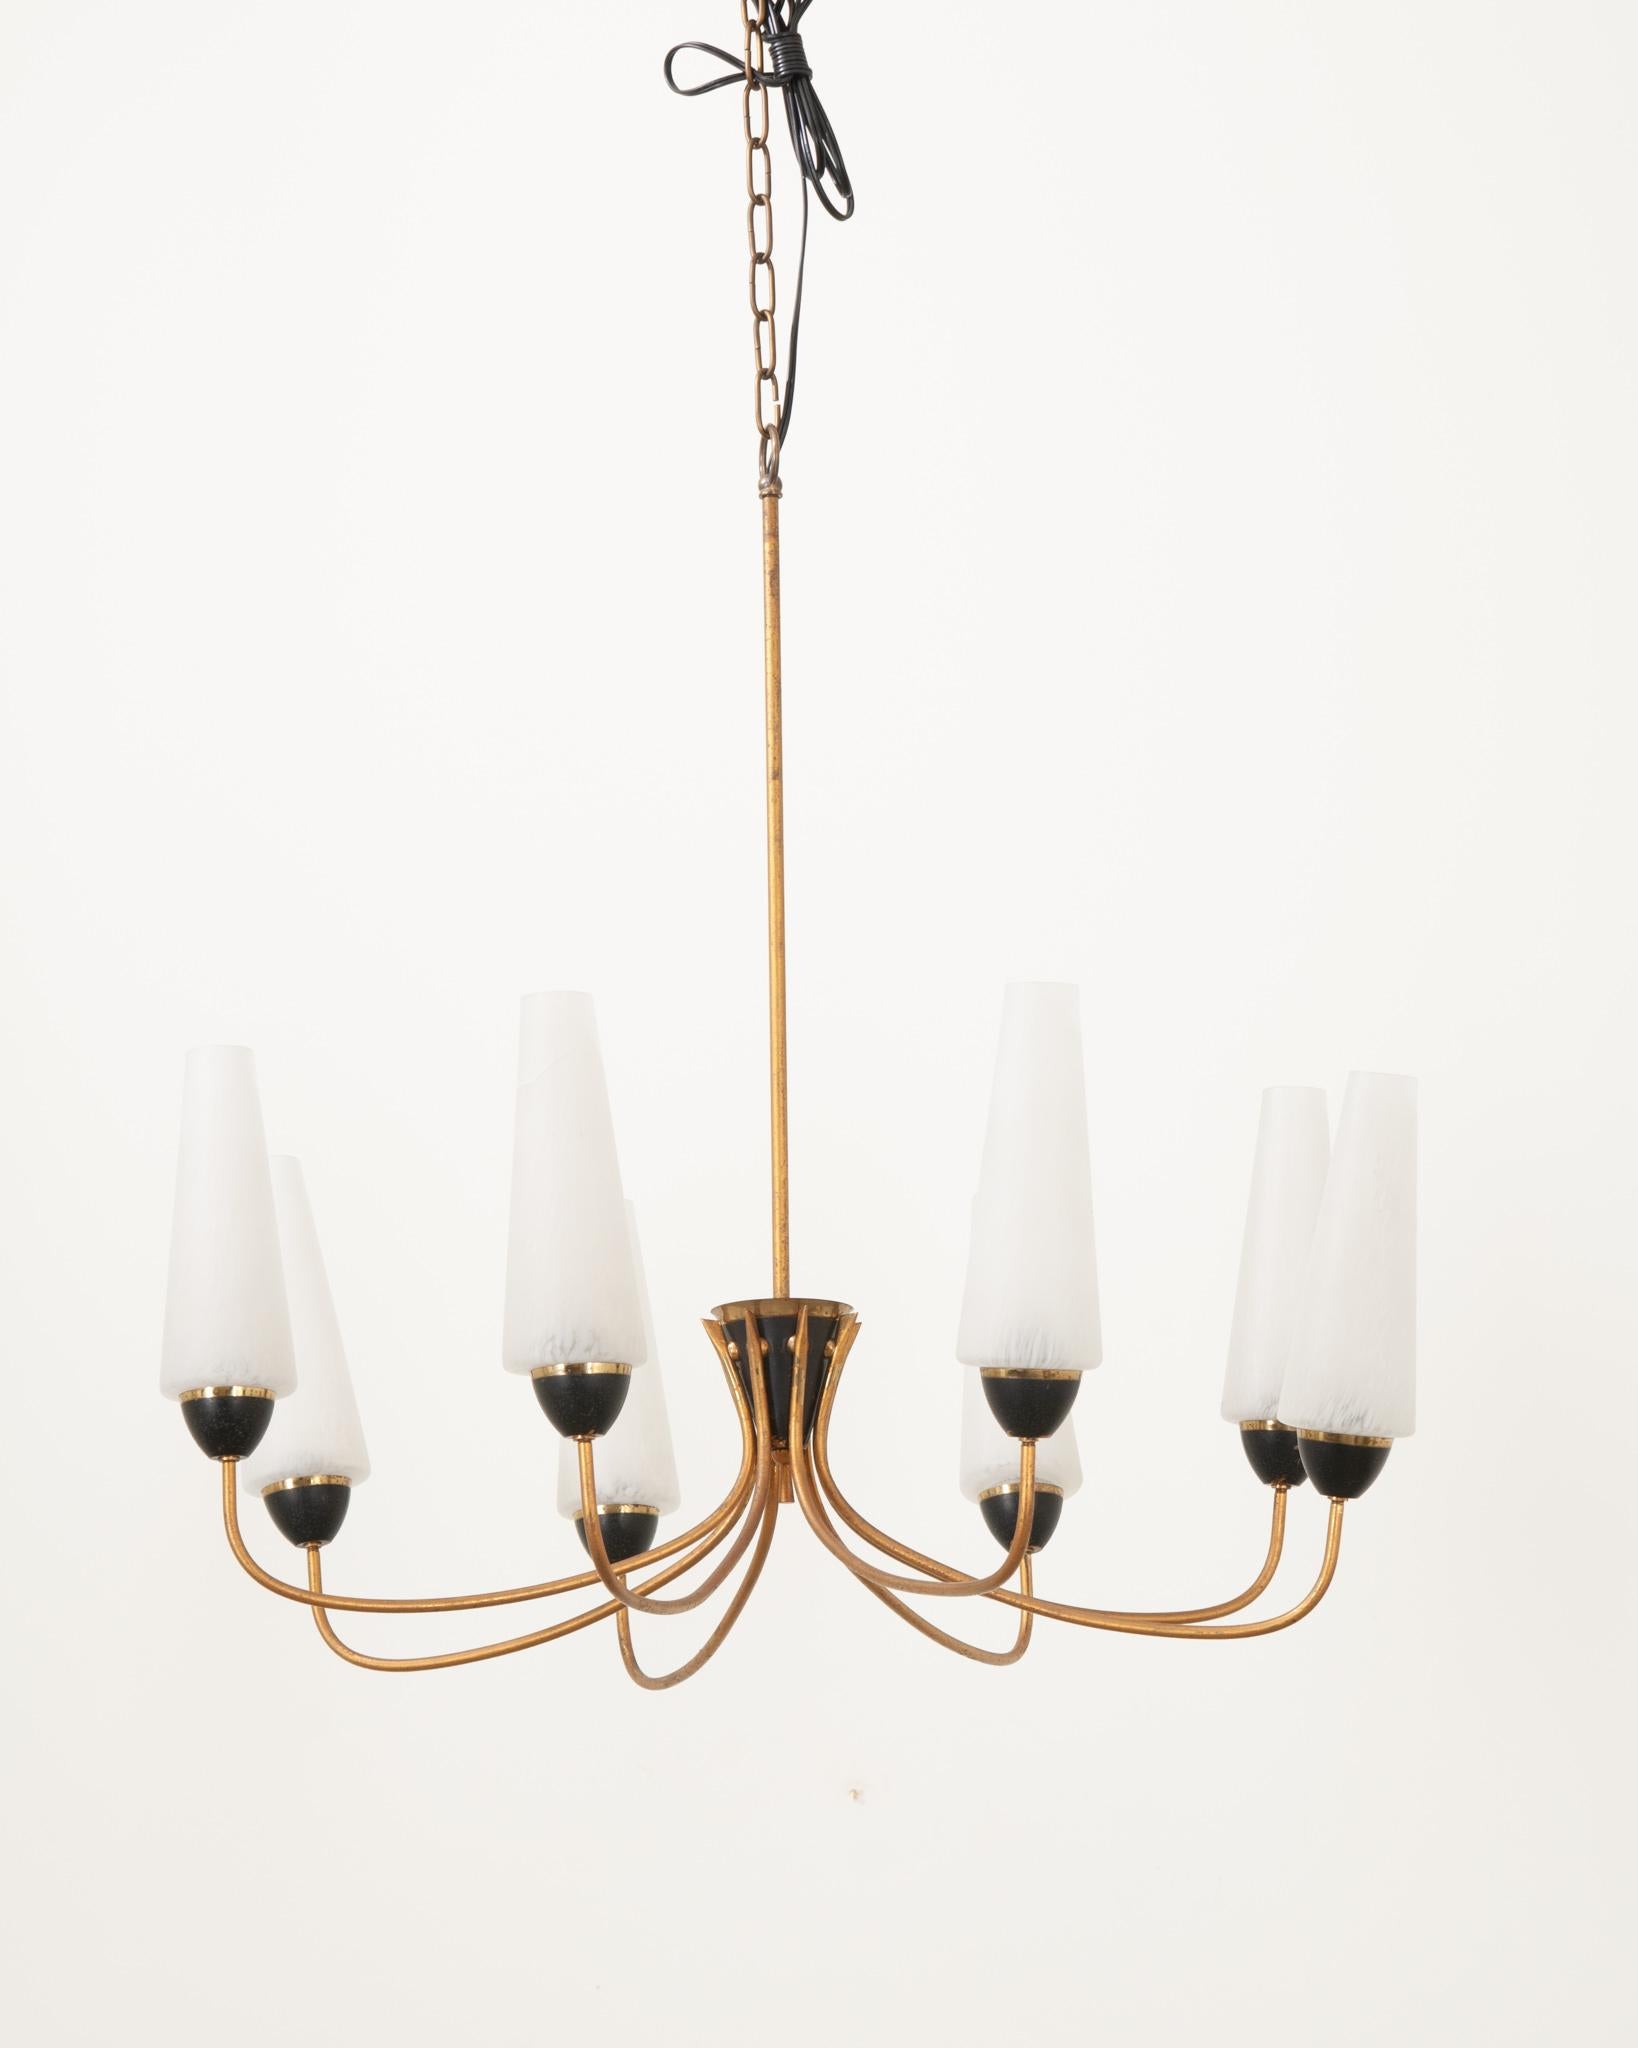 A classic mid-century 8 light chandelier. The chandelier frame is made of a gold painted metal with ebony metal accents and removable frosted glass cone shades. Above the rod we have 32” of chain with 8 feet of excess wire and a 5” diameter canopy.